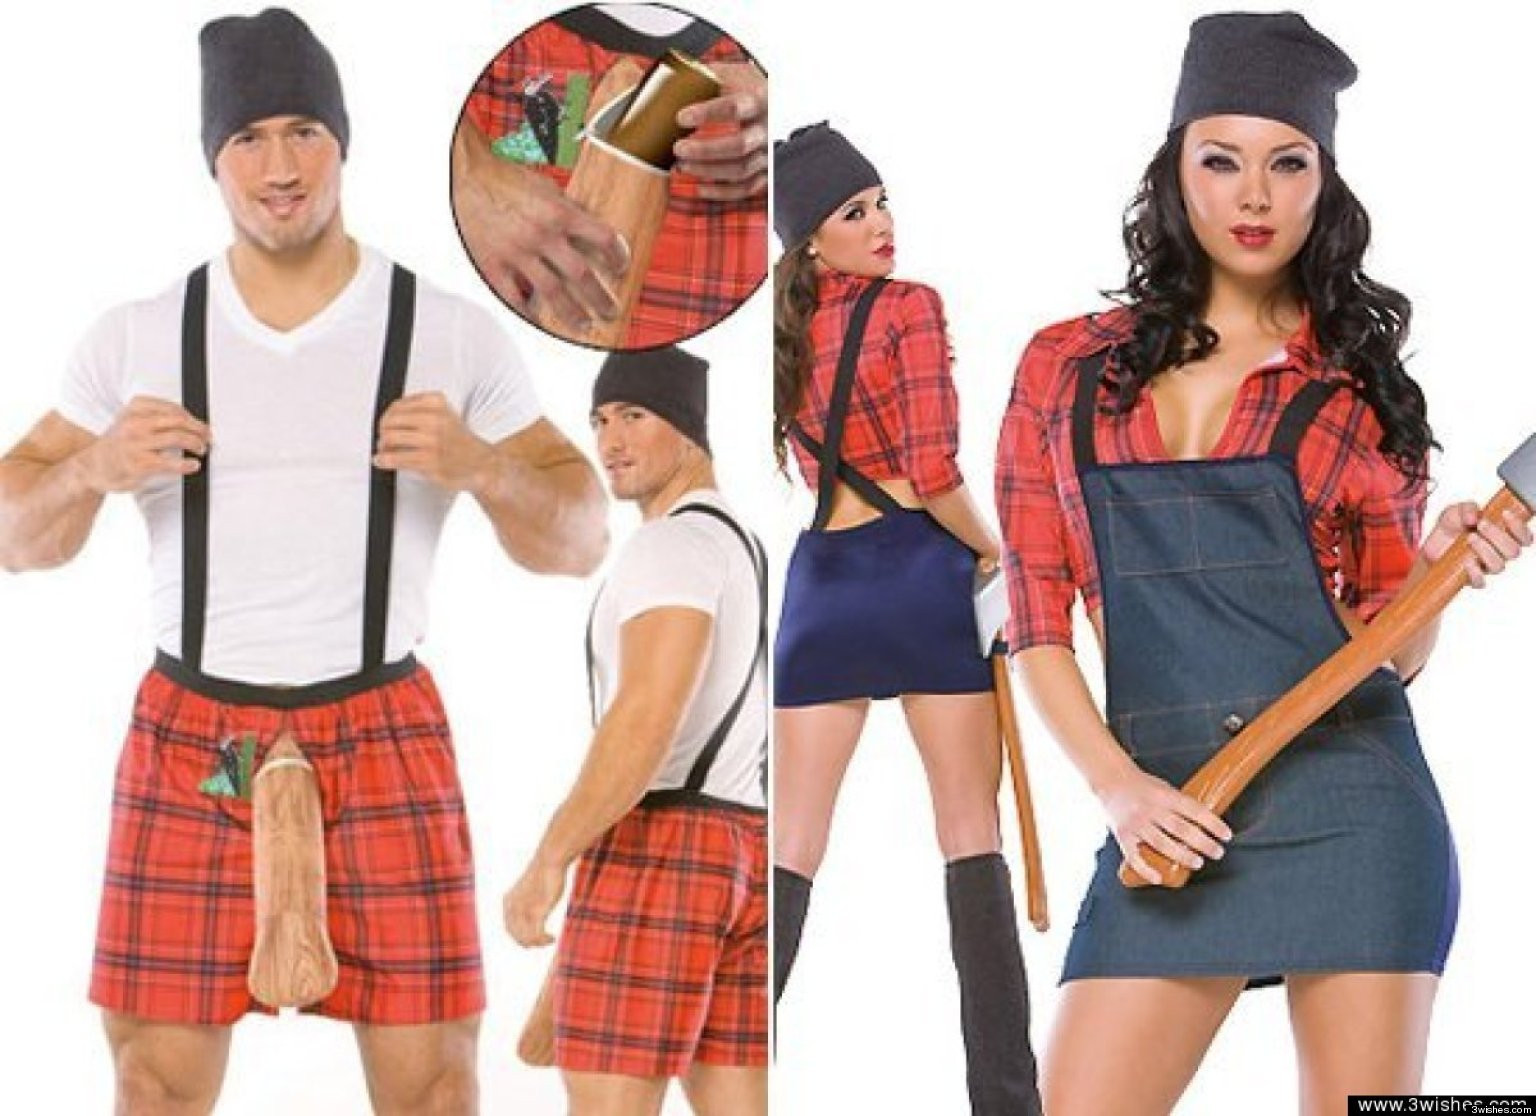 Good Ideas For Halloween Costumes
 Couples Costumes The Most Awkward Couples Halloween